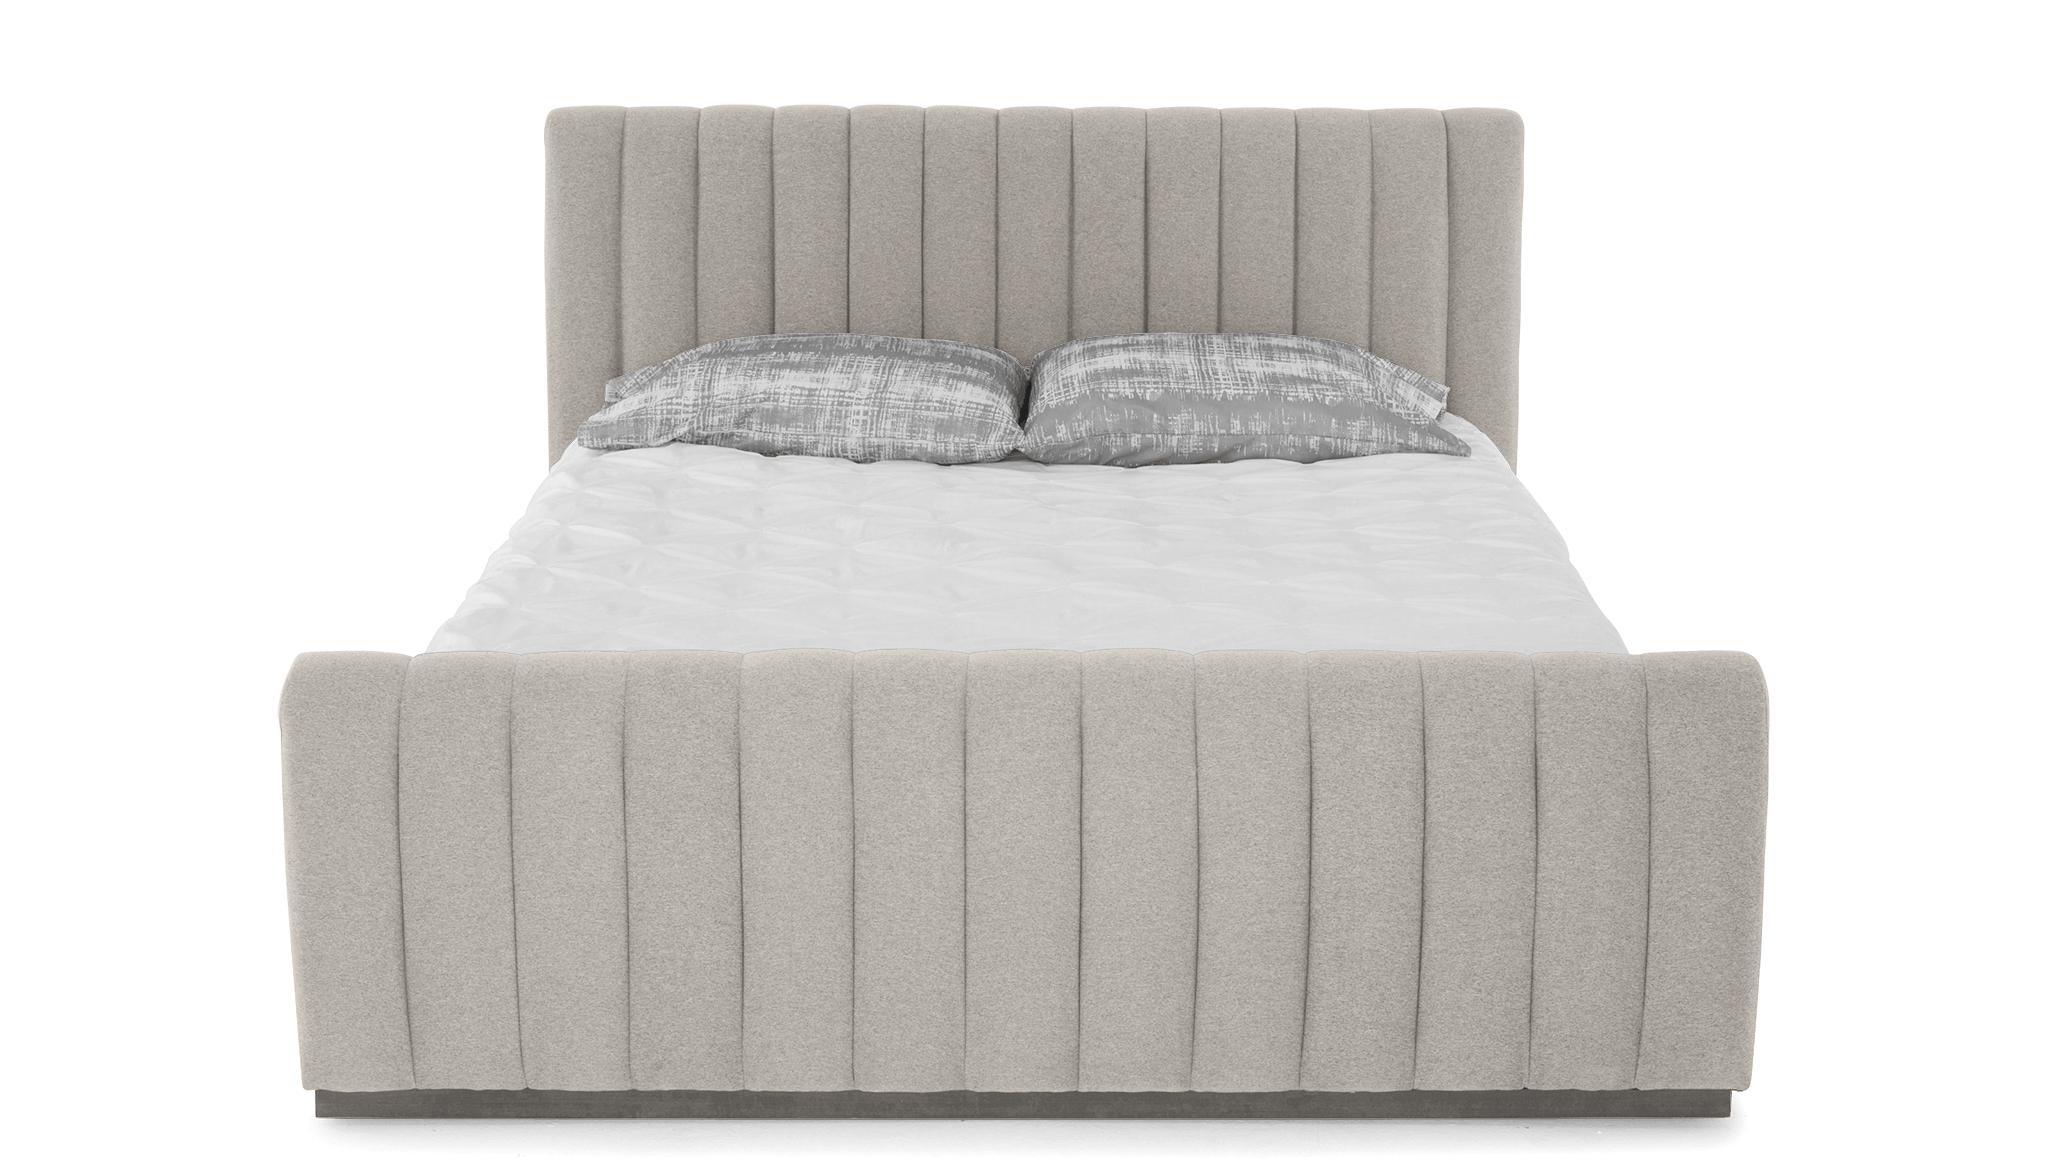 Gray Camille Mid Century Modern Bed - Prime Stone - Mocha - Eastern King - Image 0